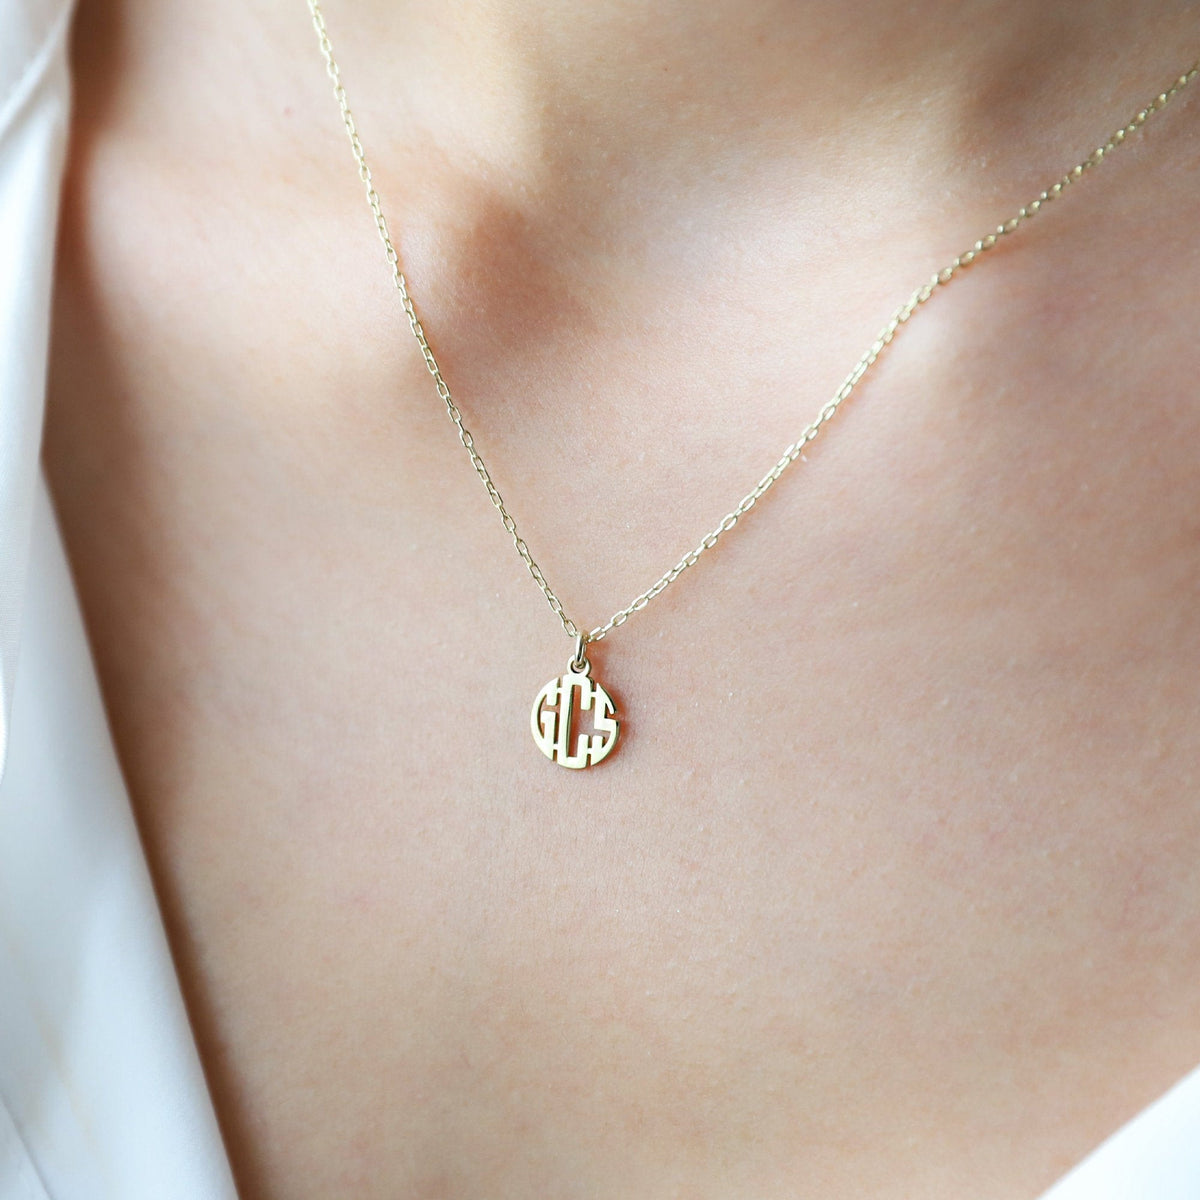 14K Solid Gold Personalized Monogram Necklace Handmade • Tiny, Cute Minimalist Jewelry by NecklaceDreamWorld